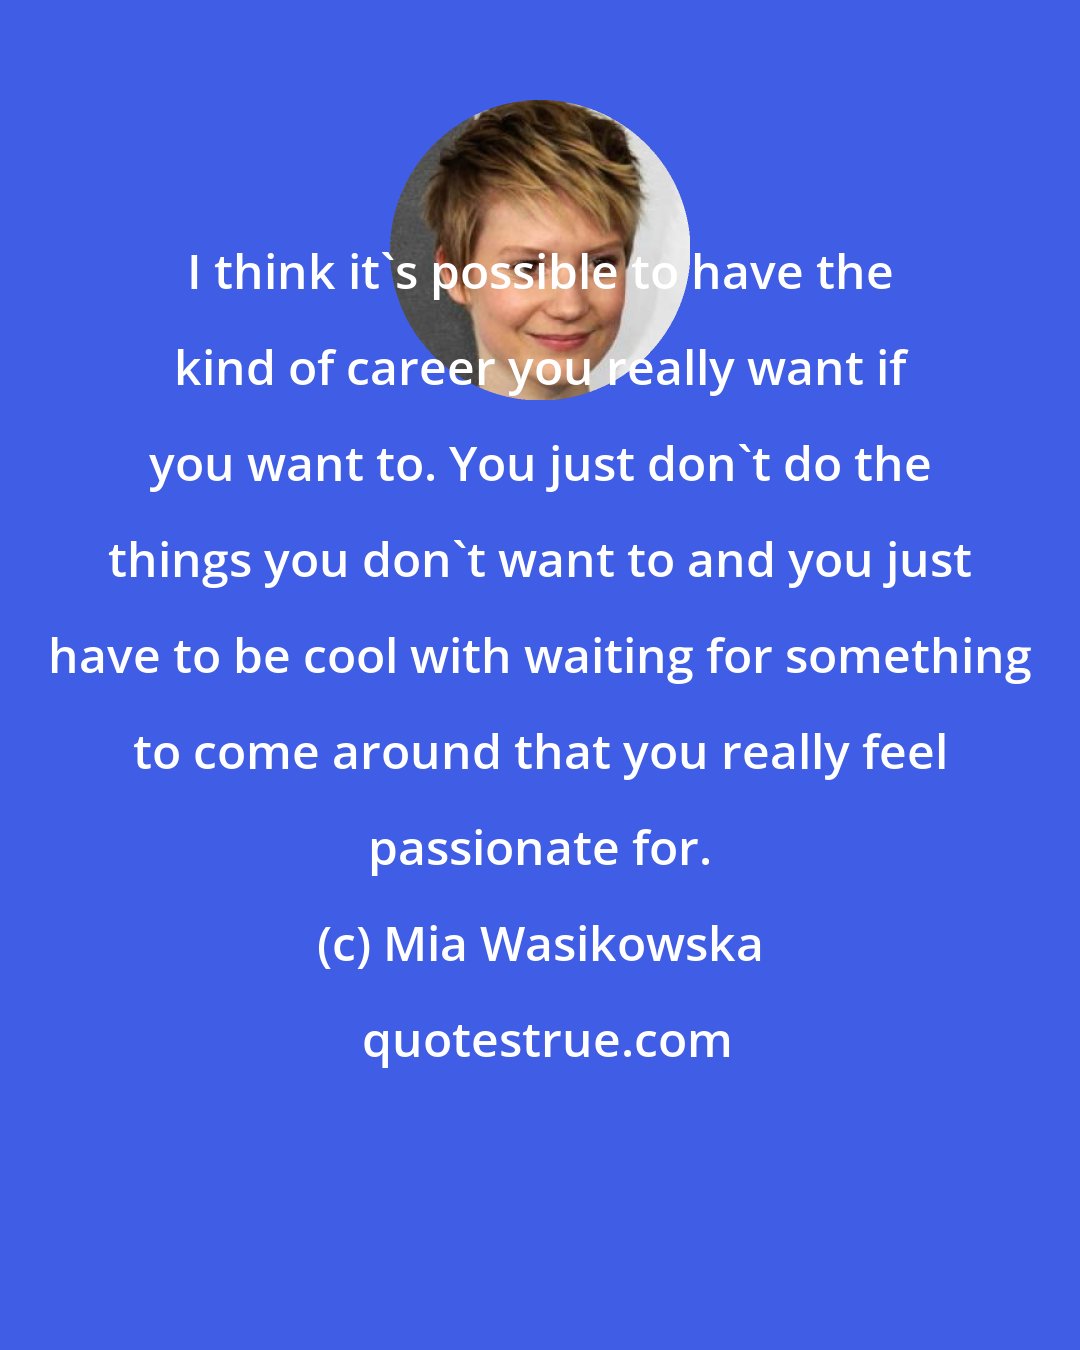 Mia Wasikowska: I think it's possible to have the kind of career you really want if you want to. You just don't do the things you don't want to and you just have to be cool with waiting for something to come around that you really feel passionate for.